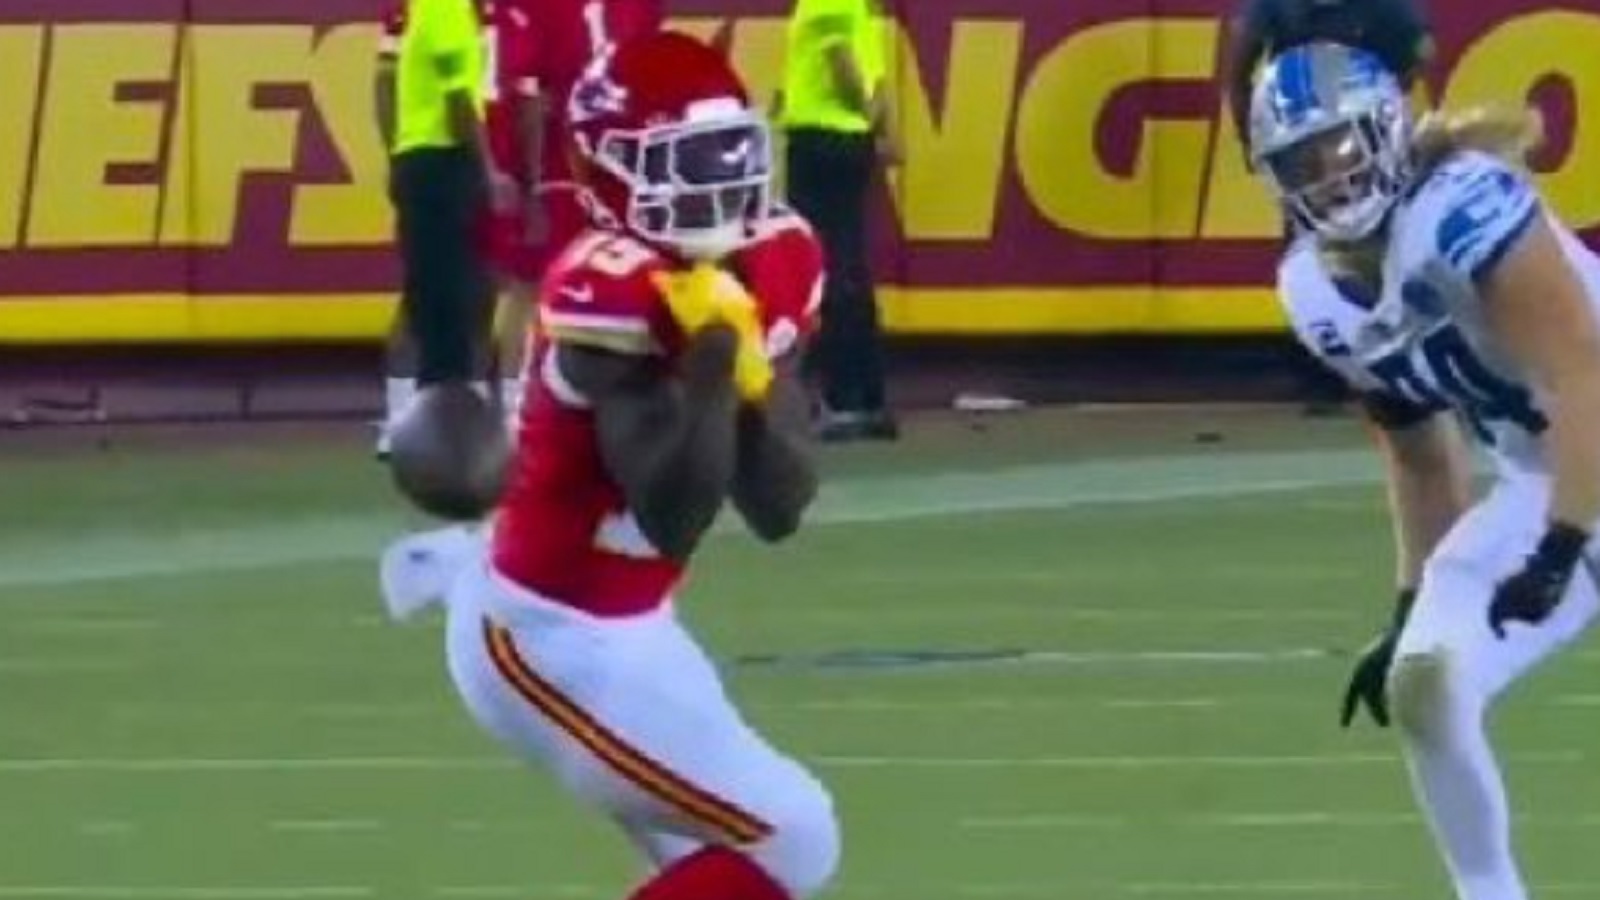 Kadarius Toney gets harsh meme treatment after costing Chiefs with drops